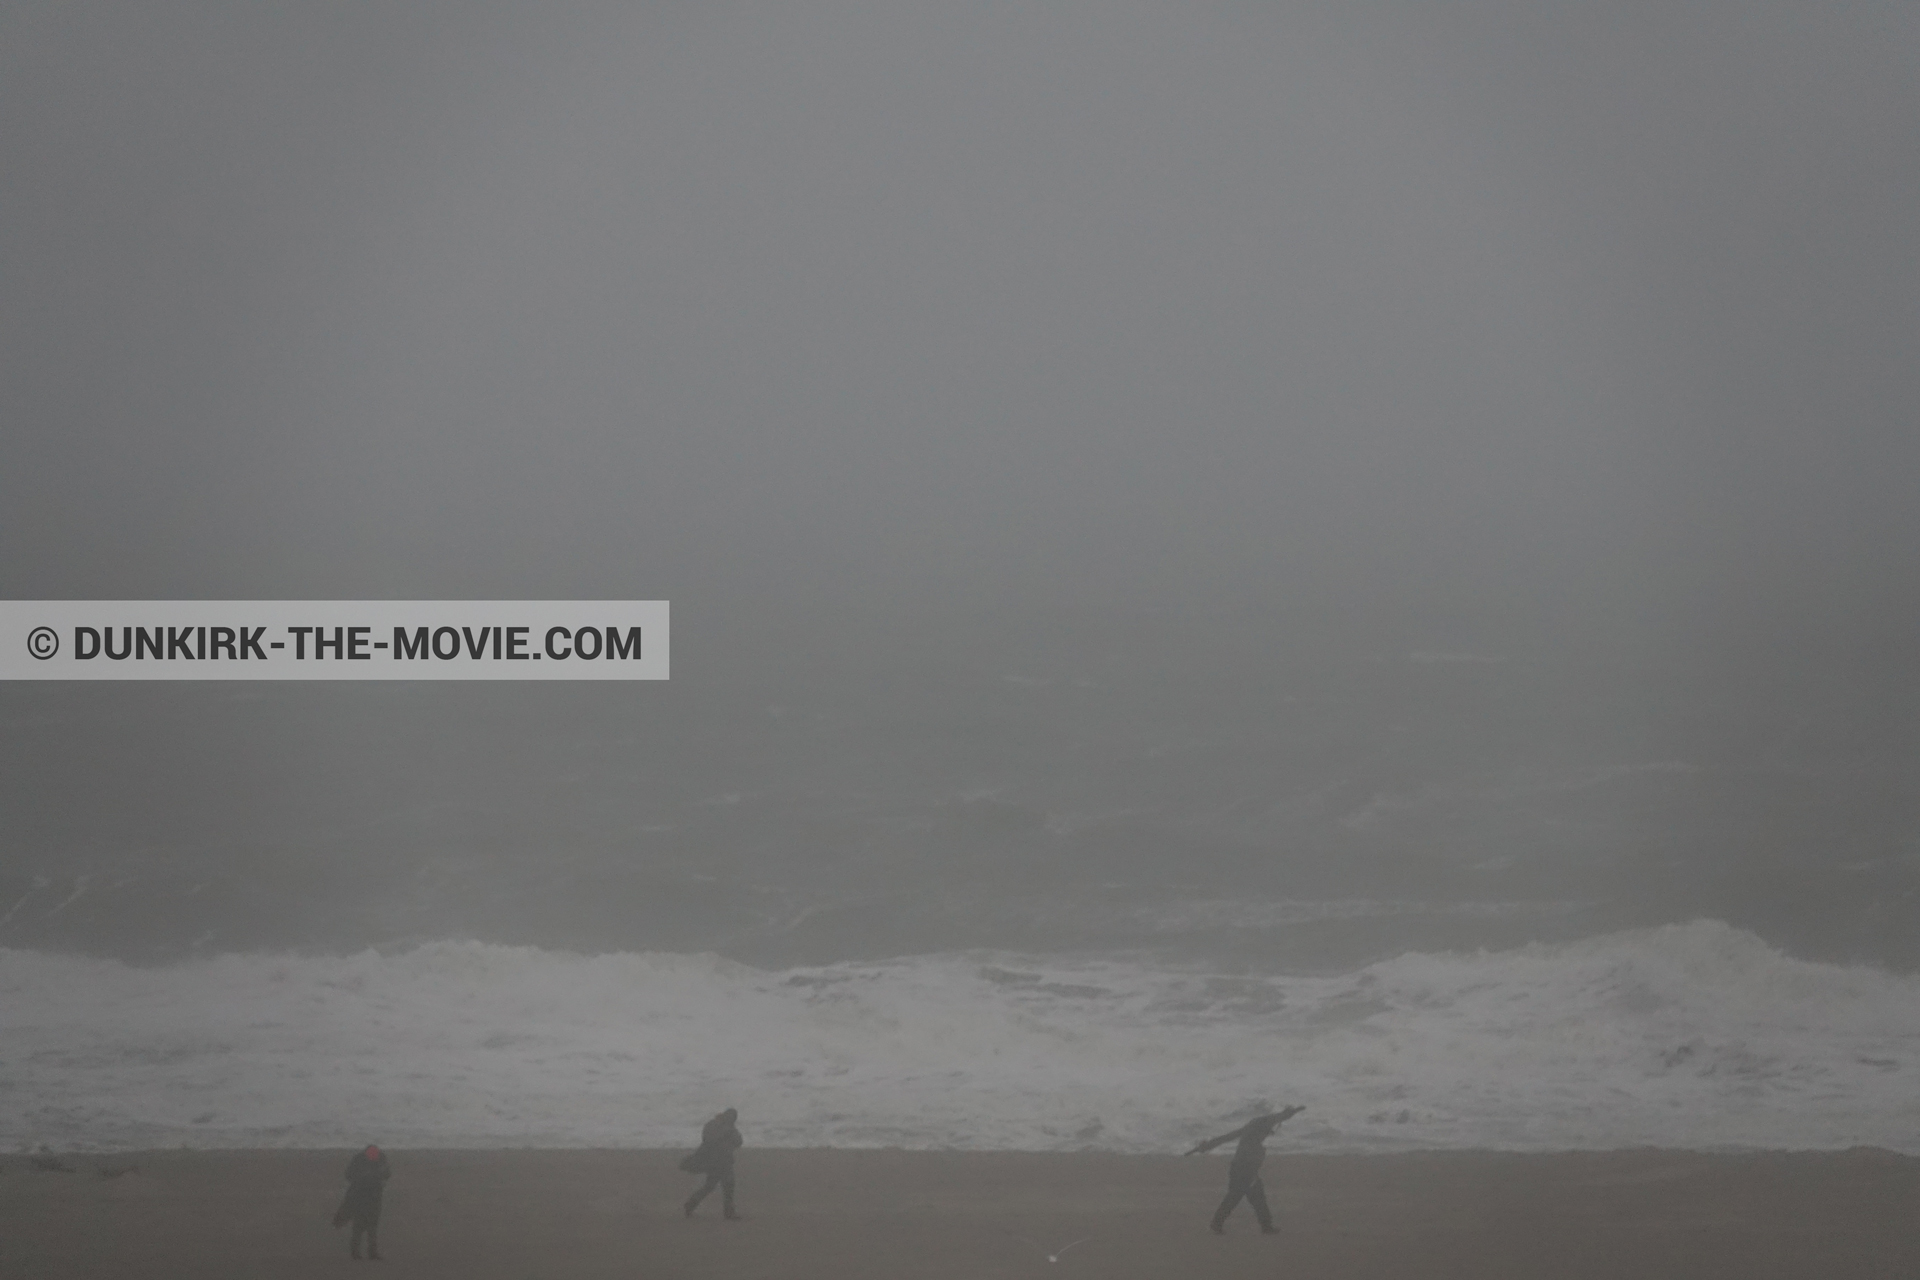 Picture with grey sky, supernumeraries, rough sea, beach,  from behind the scene of the Dunkirk movie by Nolan